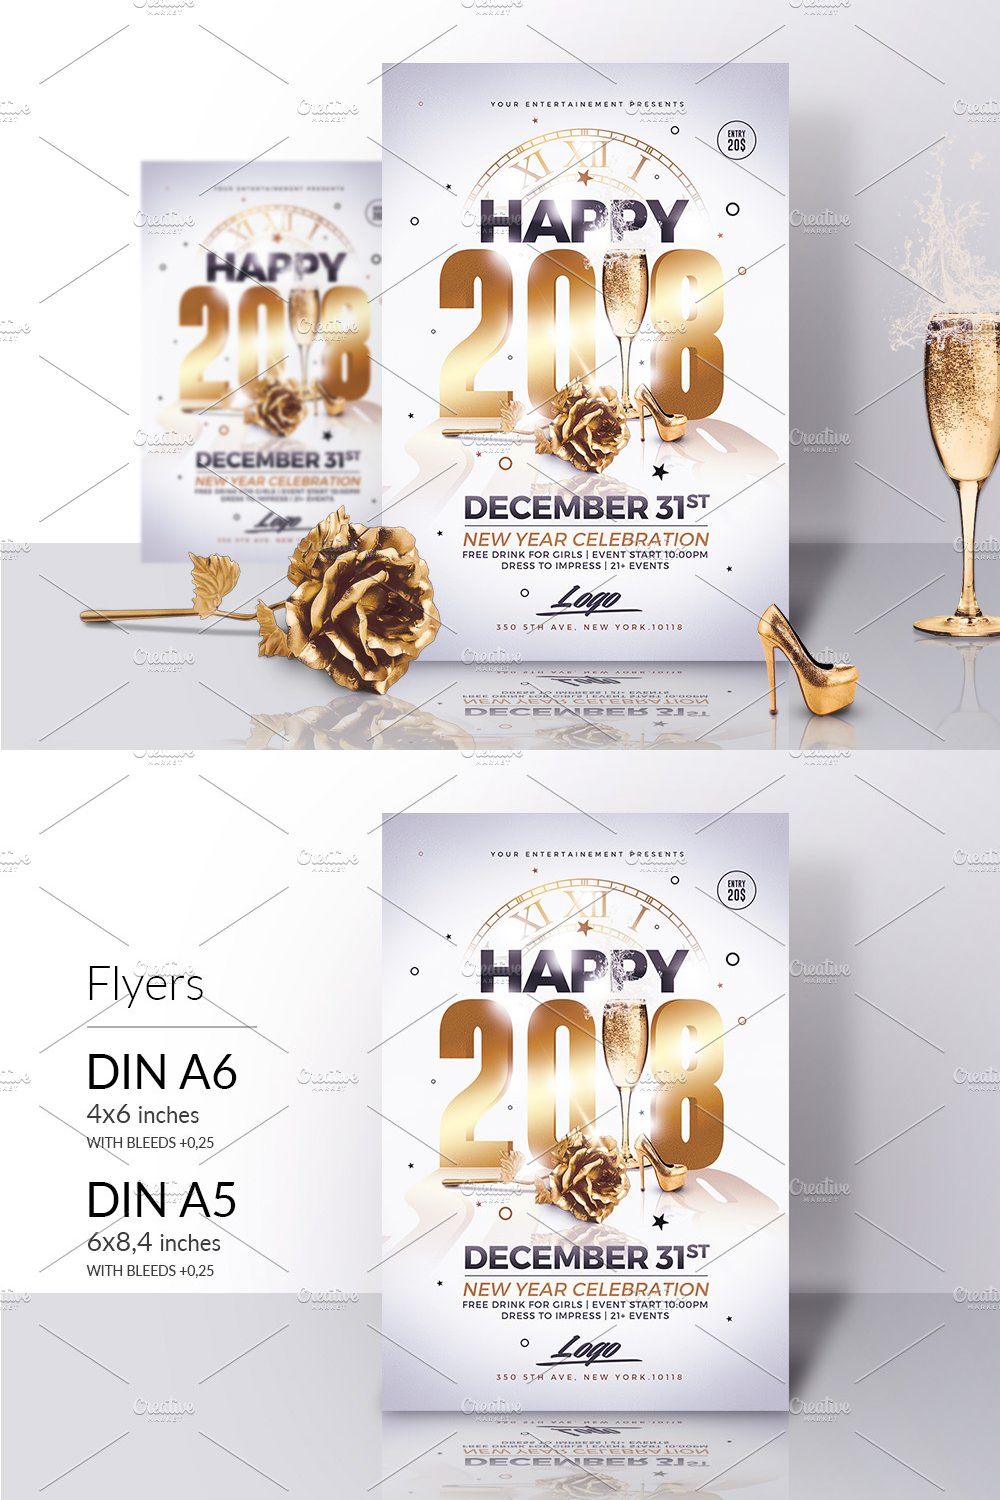 Classy New Year 2018 Invitations pinterest preview image.